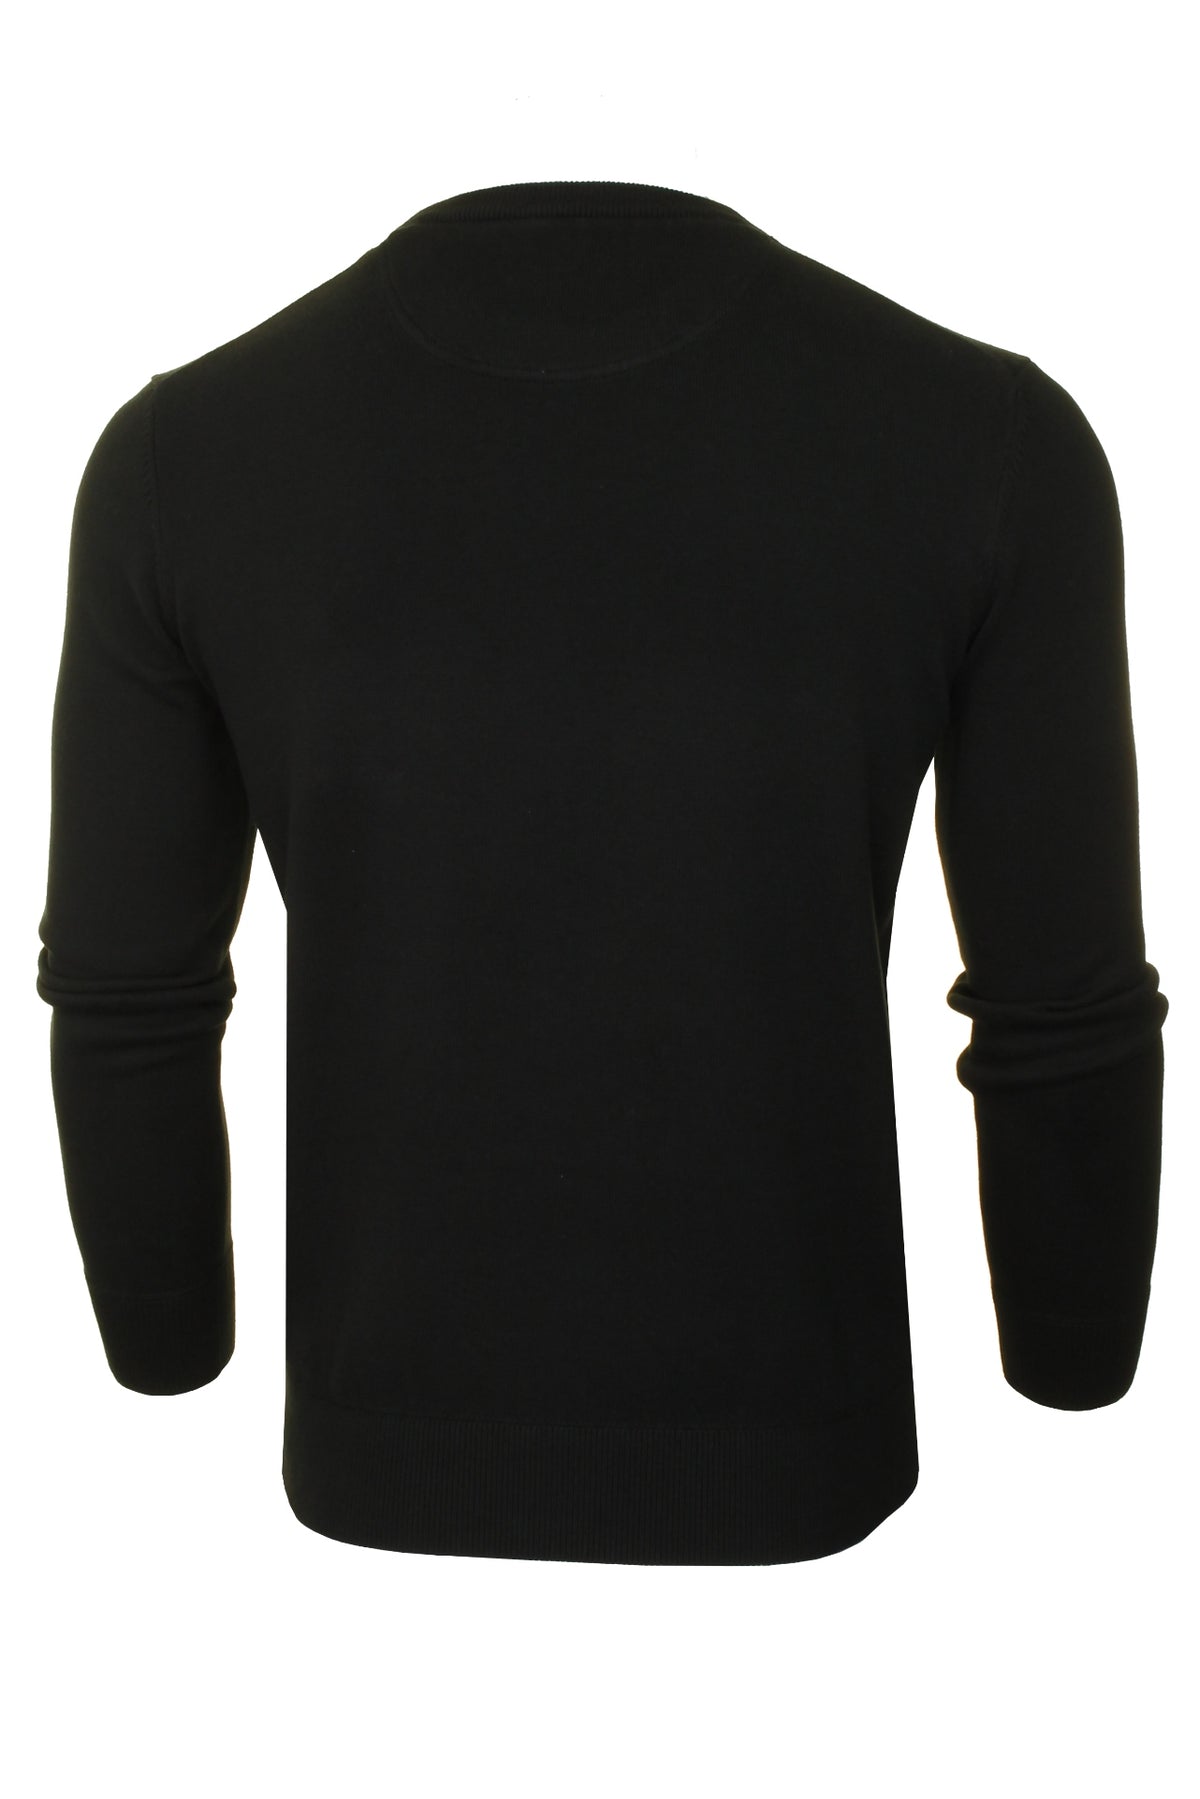 Timberland Mens Jumper 'Williams River Cotton Crew Sweater' - Long Sleeved, 03, Tb0A2Bmm, Black